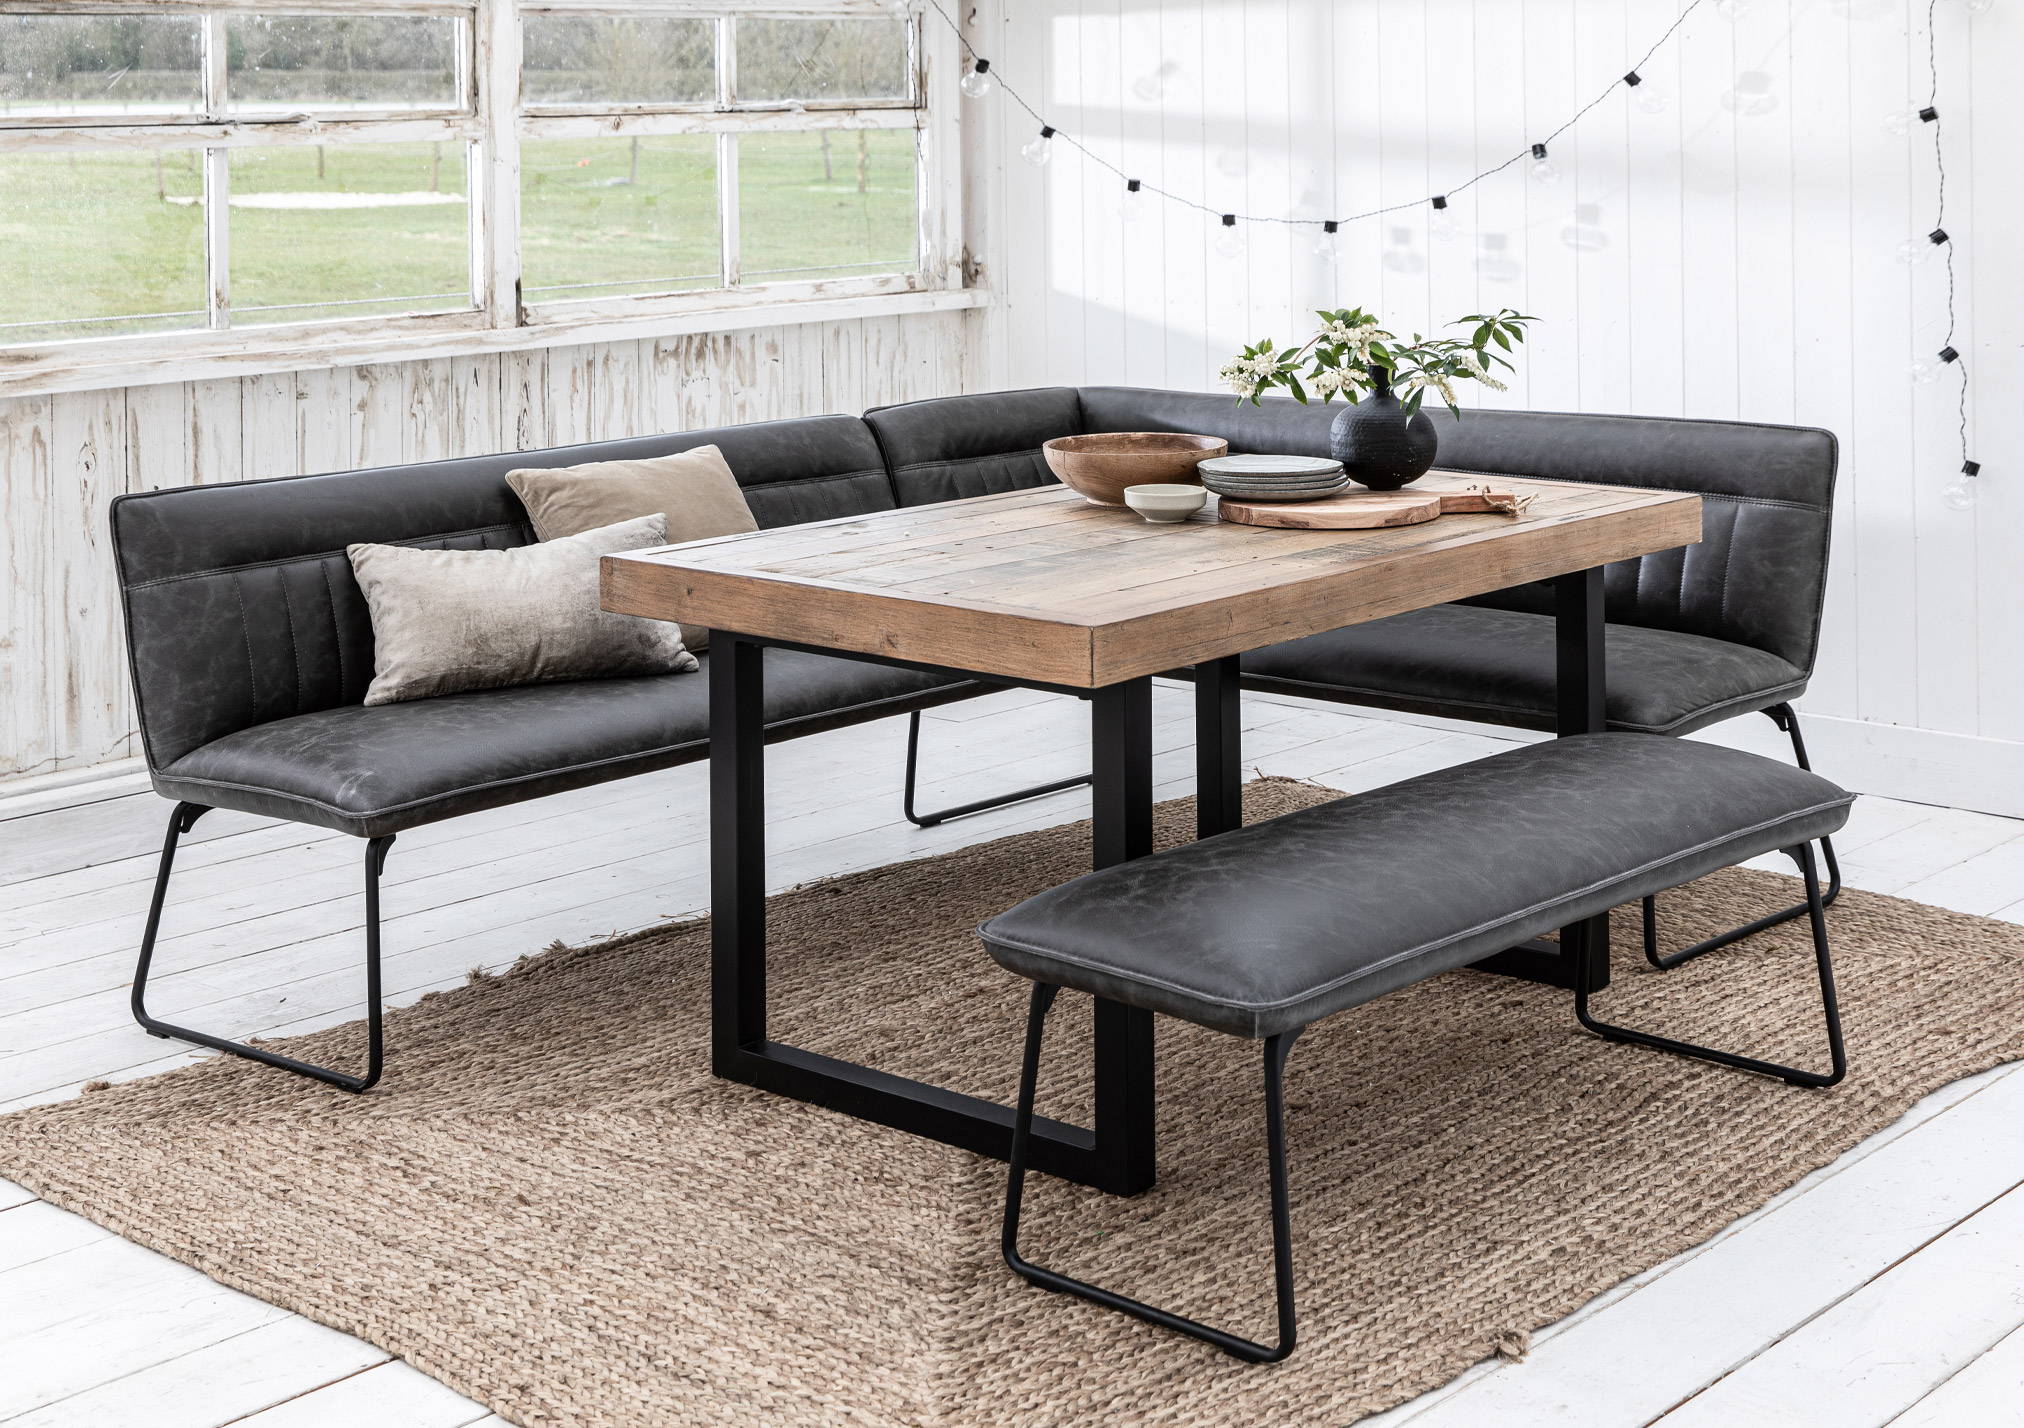 Colebrook Dining Furniture - Rustic Charm Mixed With Industrial Style